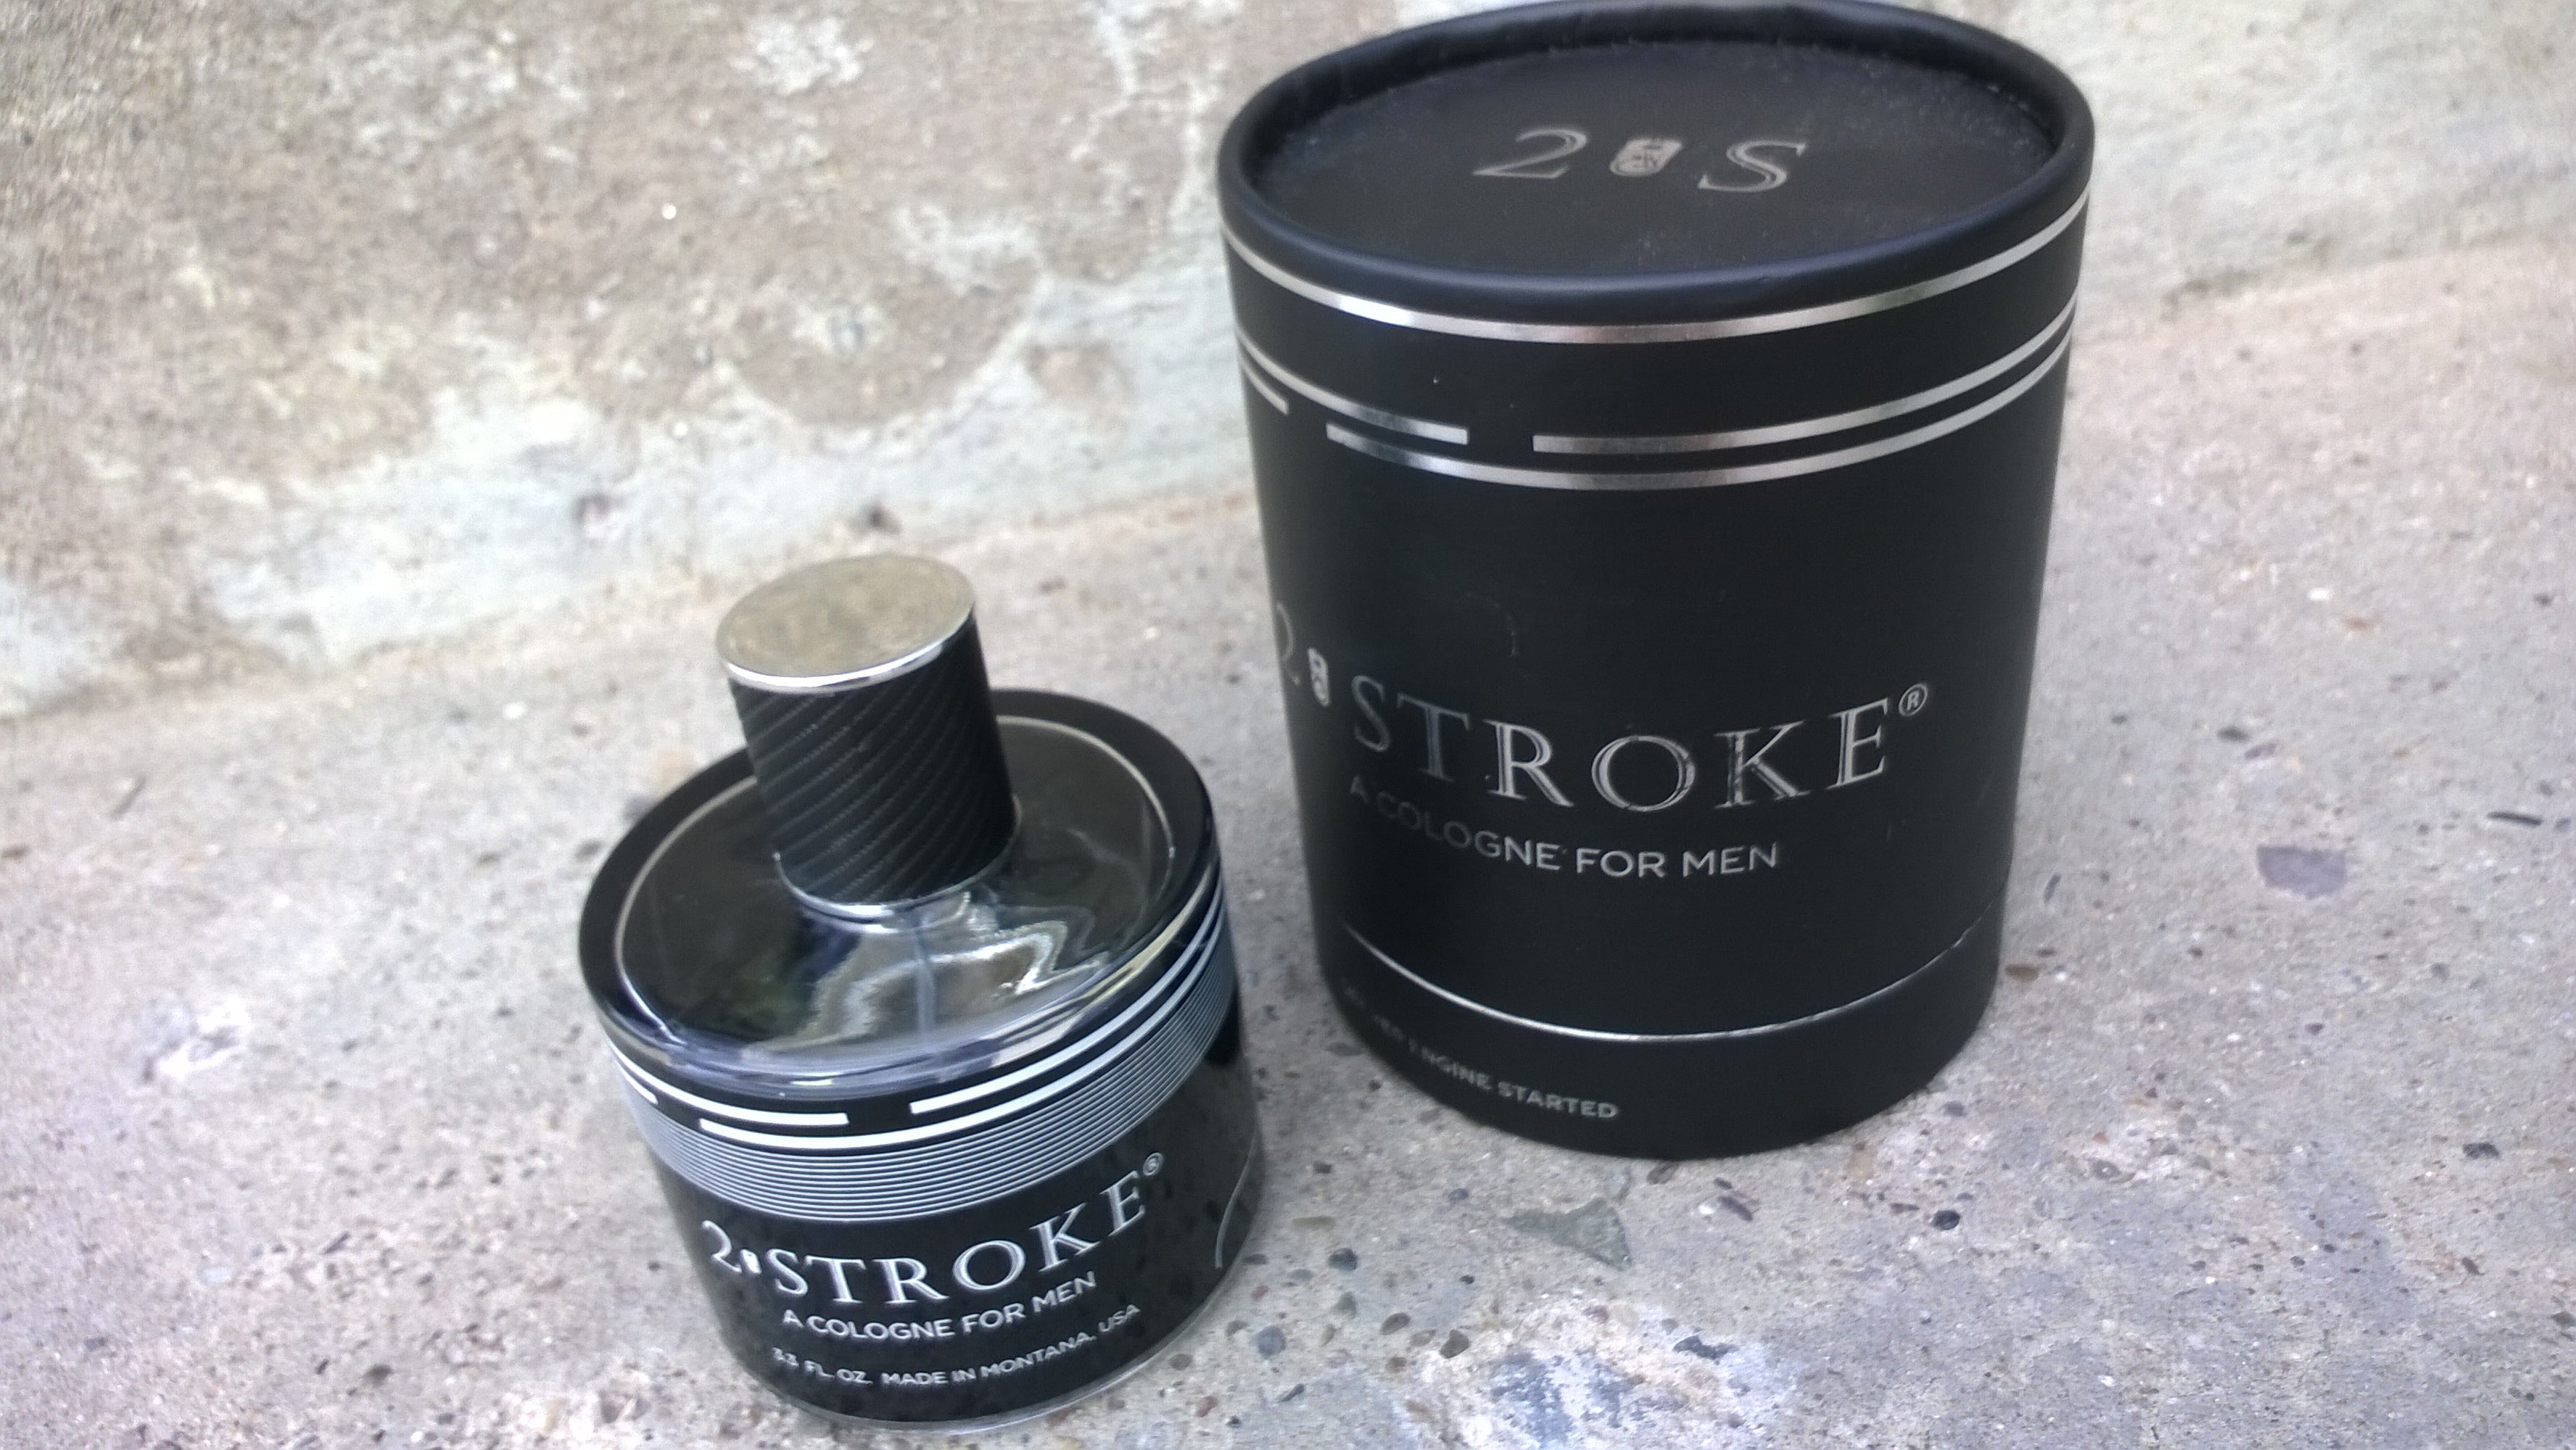 Two Stroke Cologne